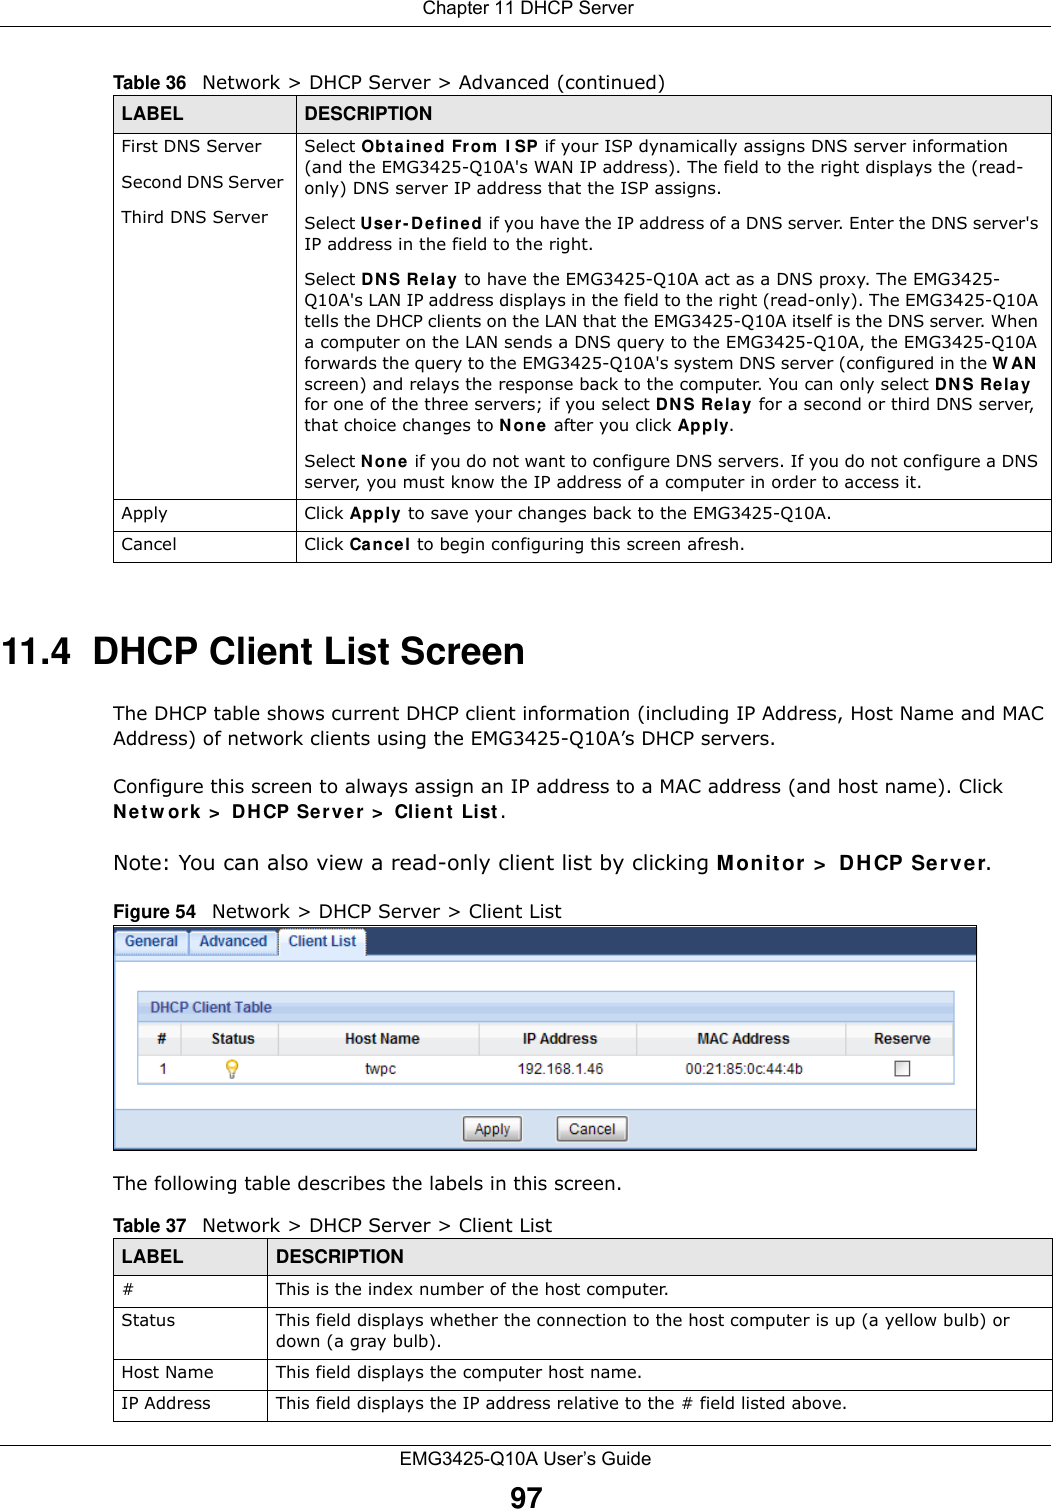  Chapter 11 DHCP ServerEMG3425-Q10A User’s Guide9711.4  DHCP Client List ScreenThe DHCP table shows current DHCP client information (including IP Address, Host Name and MAC Address) of network clients using the EMG3425-Q10A’s DHCP servers.Configure this screen to always assign an IP address to a MAC address (and host name). Click N e tw ork &gt;  DHCP Server &gt;  Clie n t  List . Note: You can also view a read-only client list by clicking Monitor &gt;  DH CP Server. Figure 54   Network &gt; DHCP Server &gt; Client ListThe following table describes the labels in this screen.First DNS ServerSecond DNS Server Third DNS ServerSelect Obtained From  I SP if your ISP dynamically assigns DNS server information (and the EMG3425-Q10A&apos;s WAN IP address). The field to the right displays the (read-only) DNS server IP address that the ISP assigns. Select Use r- D efine d if you have the IP address of a DNS server. Enter the DNS server&apos;s IP address in the field to the right.  Select DNS Relay to have the EMG3425-Q10A act as a DNS proxy. The EMG3425-Q10A&apos;s LAN IP address displays in the field to the right (read-only). The EMG3425-Q10A tells the DHCP clients on the LAN that the EMG3425-Q10A itself is the DNS server. When a computer on the LAN sends a DNS query to the EMG3425-Q10A, the EMG3425-Q10A forwards the query to the EMG3425-Q10A&apos;s system DNS server (configured in the W AN  screen) and relays the response back to the computer. You can only select DN S Relay for one of the three servers; if you select DNS Re la y for a second or third DNS server, that choice changes to N one after you click Apply. Select N one  if you do not want to configure DNS servers. If you do not configure a DNS server, you must know the IP address of a computer in order to access it.Apply Click Apply  to save your changes back to the EMG3425-Q10A.Cancel Click Cancel to begin configuring this screen afresh.Table 36   Network &gt; DHCP Server &gt; Advanced (continued)LABEL DESCRIPTIONTable 37   Network &gt; DHCP Server &gt; Client ListLABEL  DESCRIPTION#  This is the index number of the host computer.Status This field displays whether the connection to the host computer is up (a yellow bulb) or down (a gray bulb).Host Name This field displays the computer host name.IP Address This field displays the IP address relative to the # field listed above.